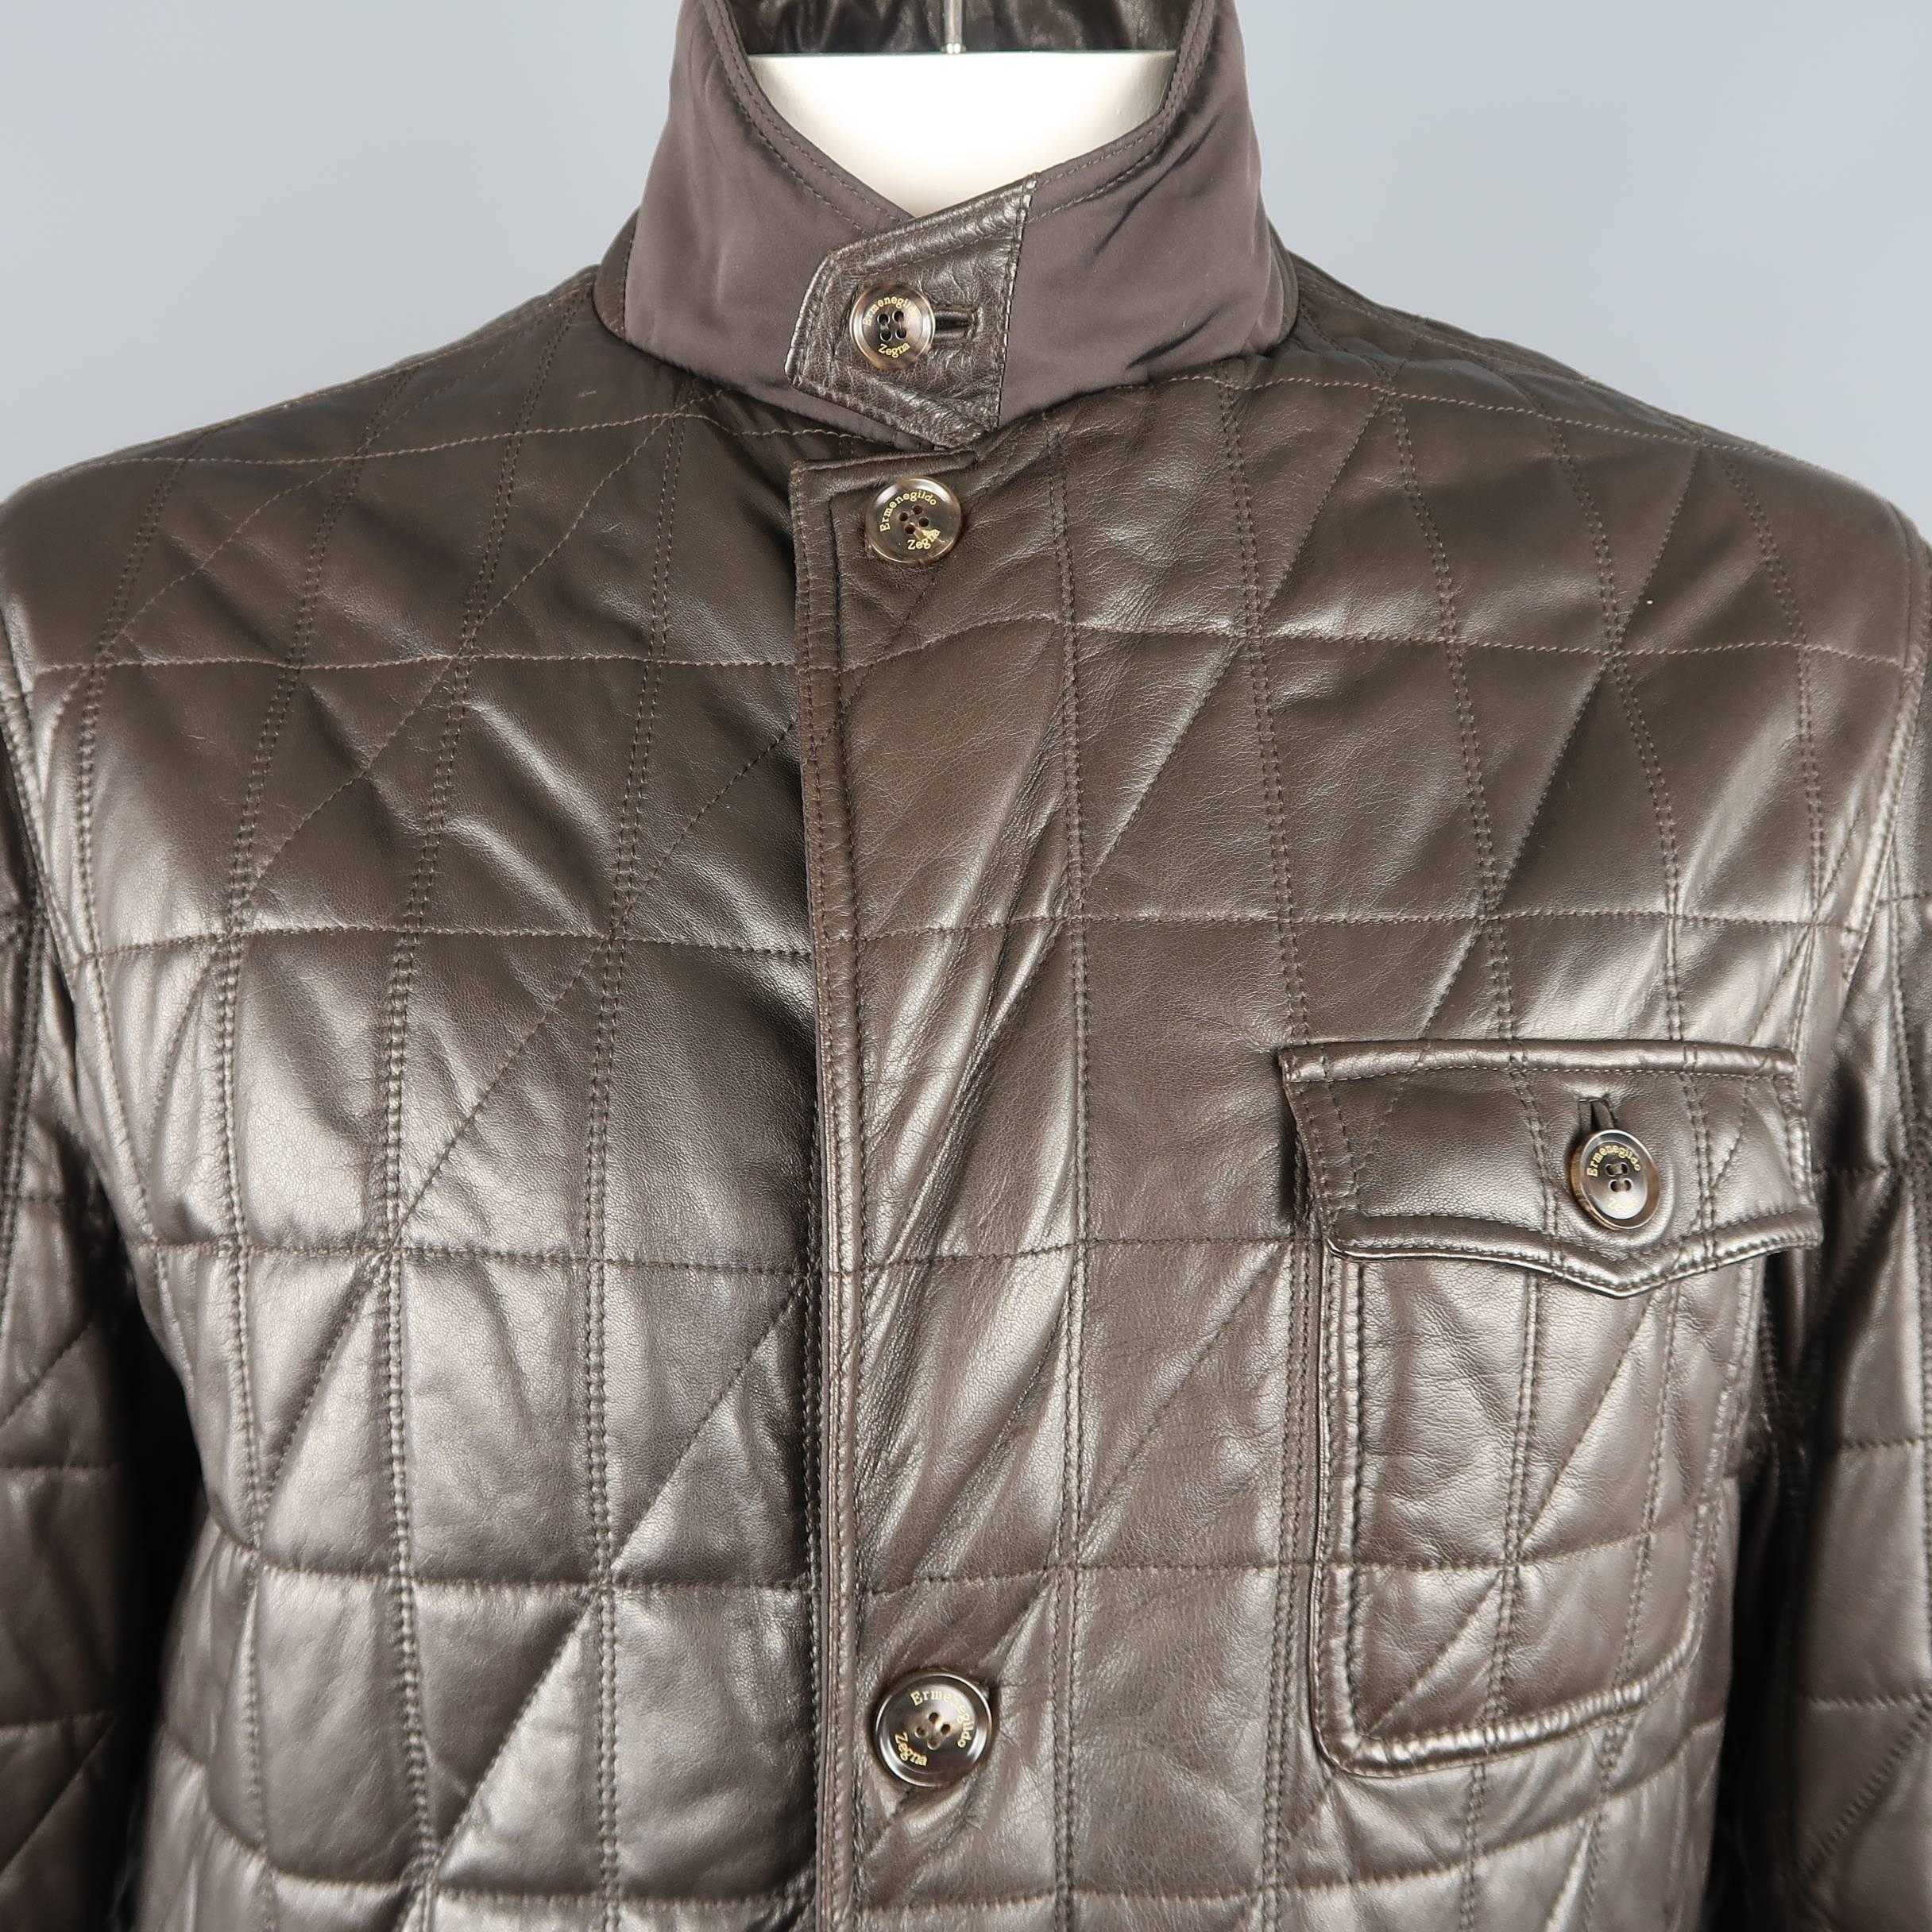 ERMENEGILDO ZEGNA jacket comes in rich chocolate brown supple quilted leather with a high buttoned collar, buttoned placket zip front, and patch flap pockets.  Made in Italy.
 
Excellent Pre-Owned Condition.
Marked: IT 56
 
Measurements:
 
Shoulder: